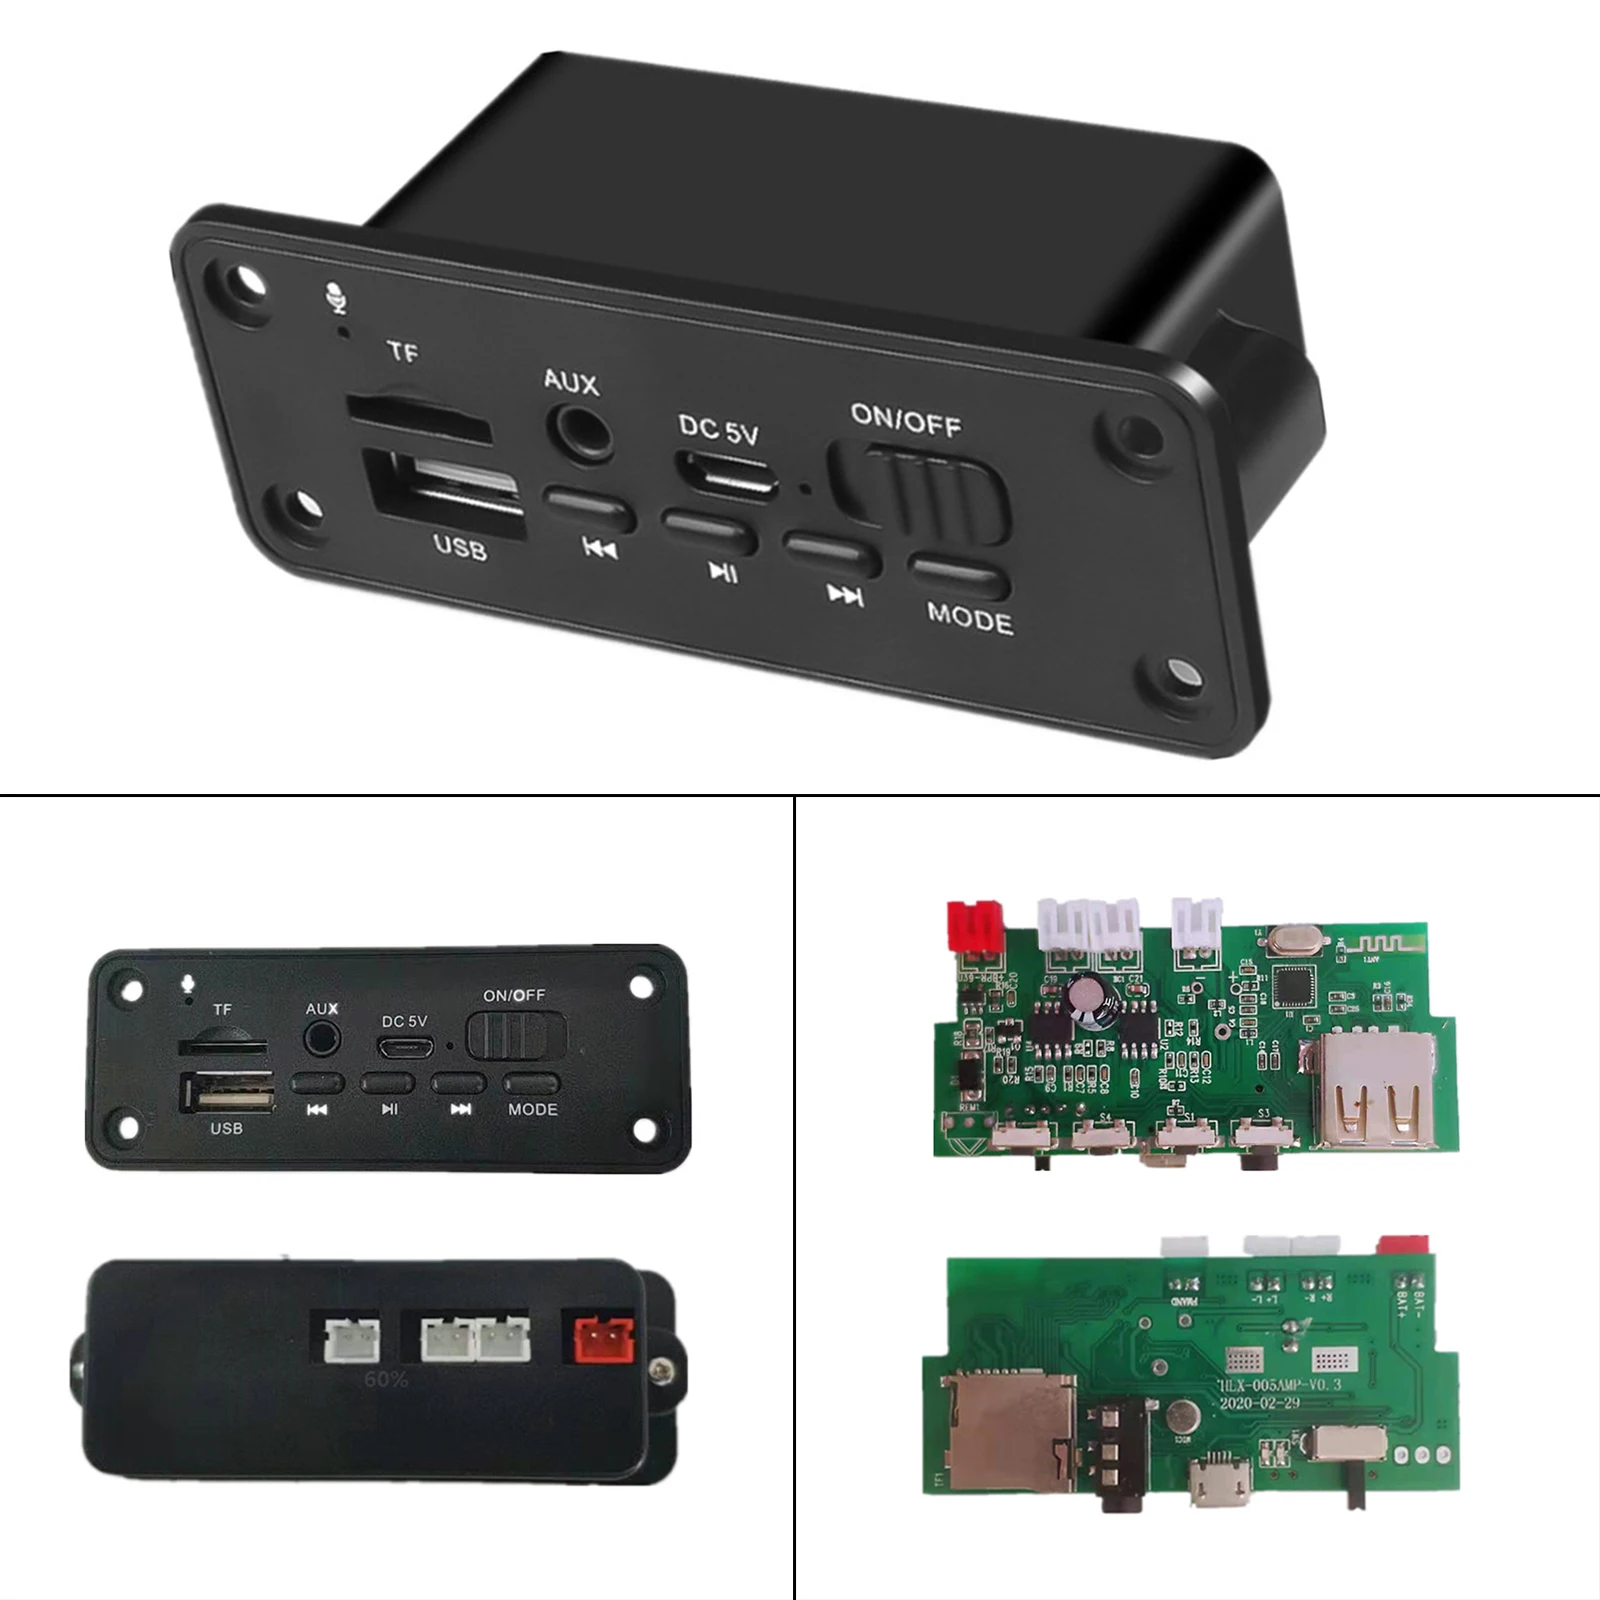 MP3 Decoder Board 5V Bluetooth Module AUX Input Player w/ Power Amplifier 2 x 3W Support MP3 USB TF Card Function